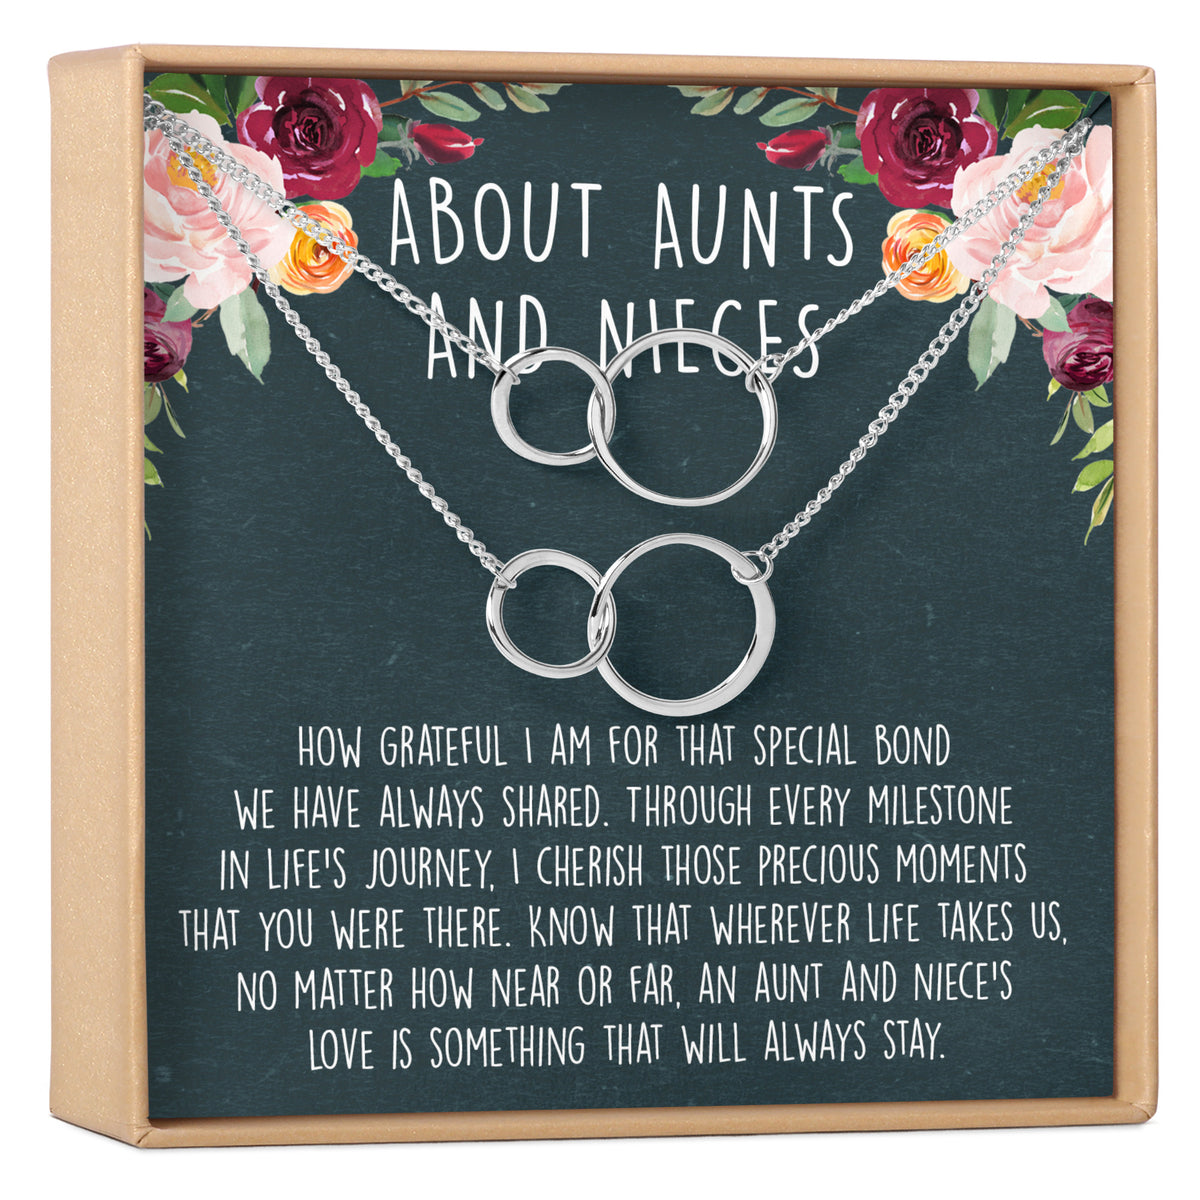 Aunt-Niece Necklace, Multiple Styles